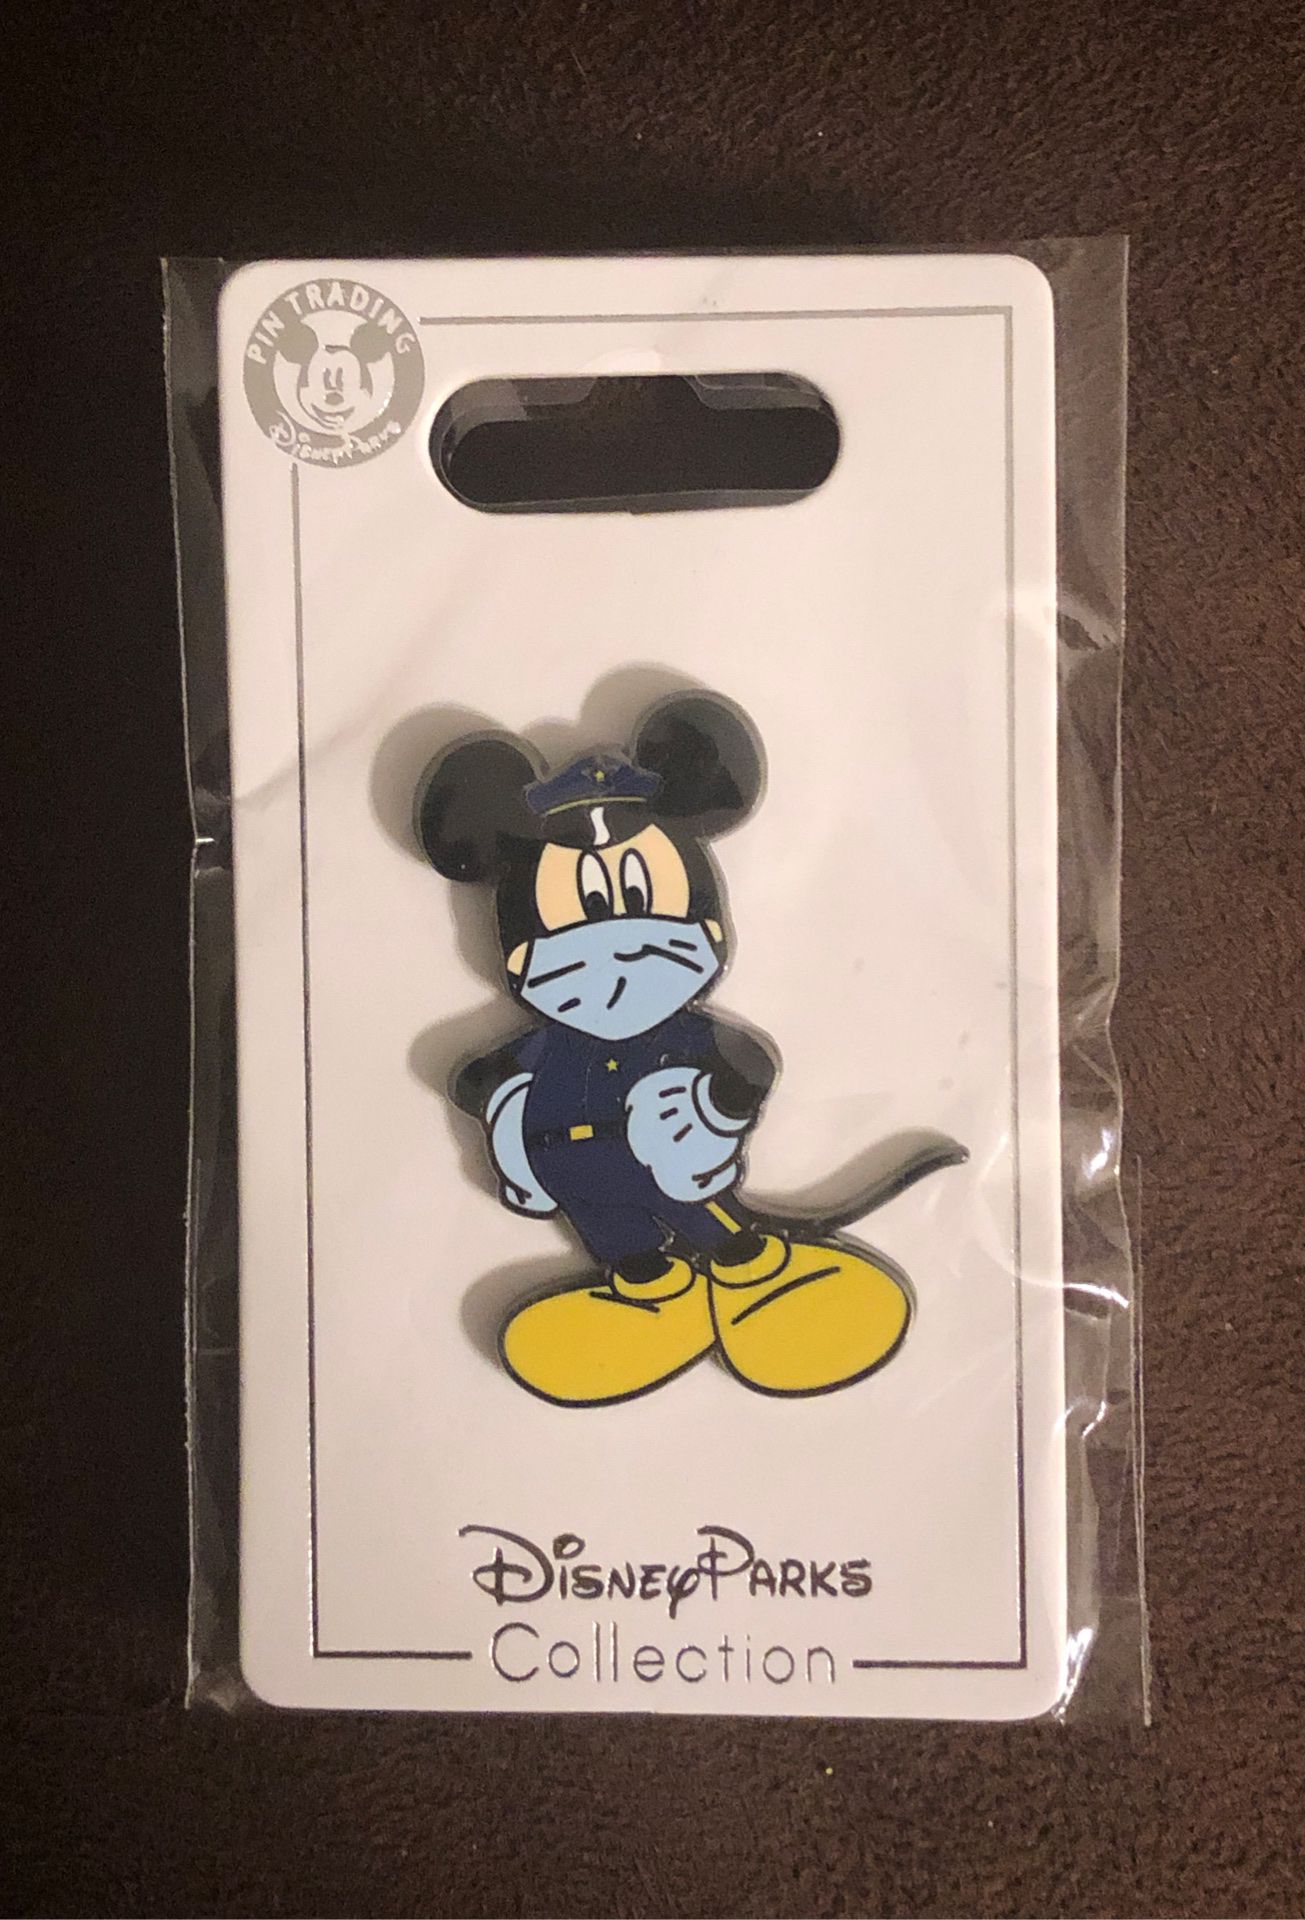 (NEW) Disney Parks Collection (Police Mickey) with Covid-19 Mask TRADING PIN